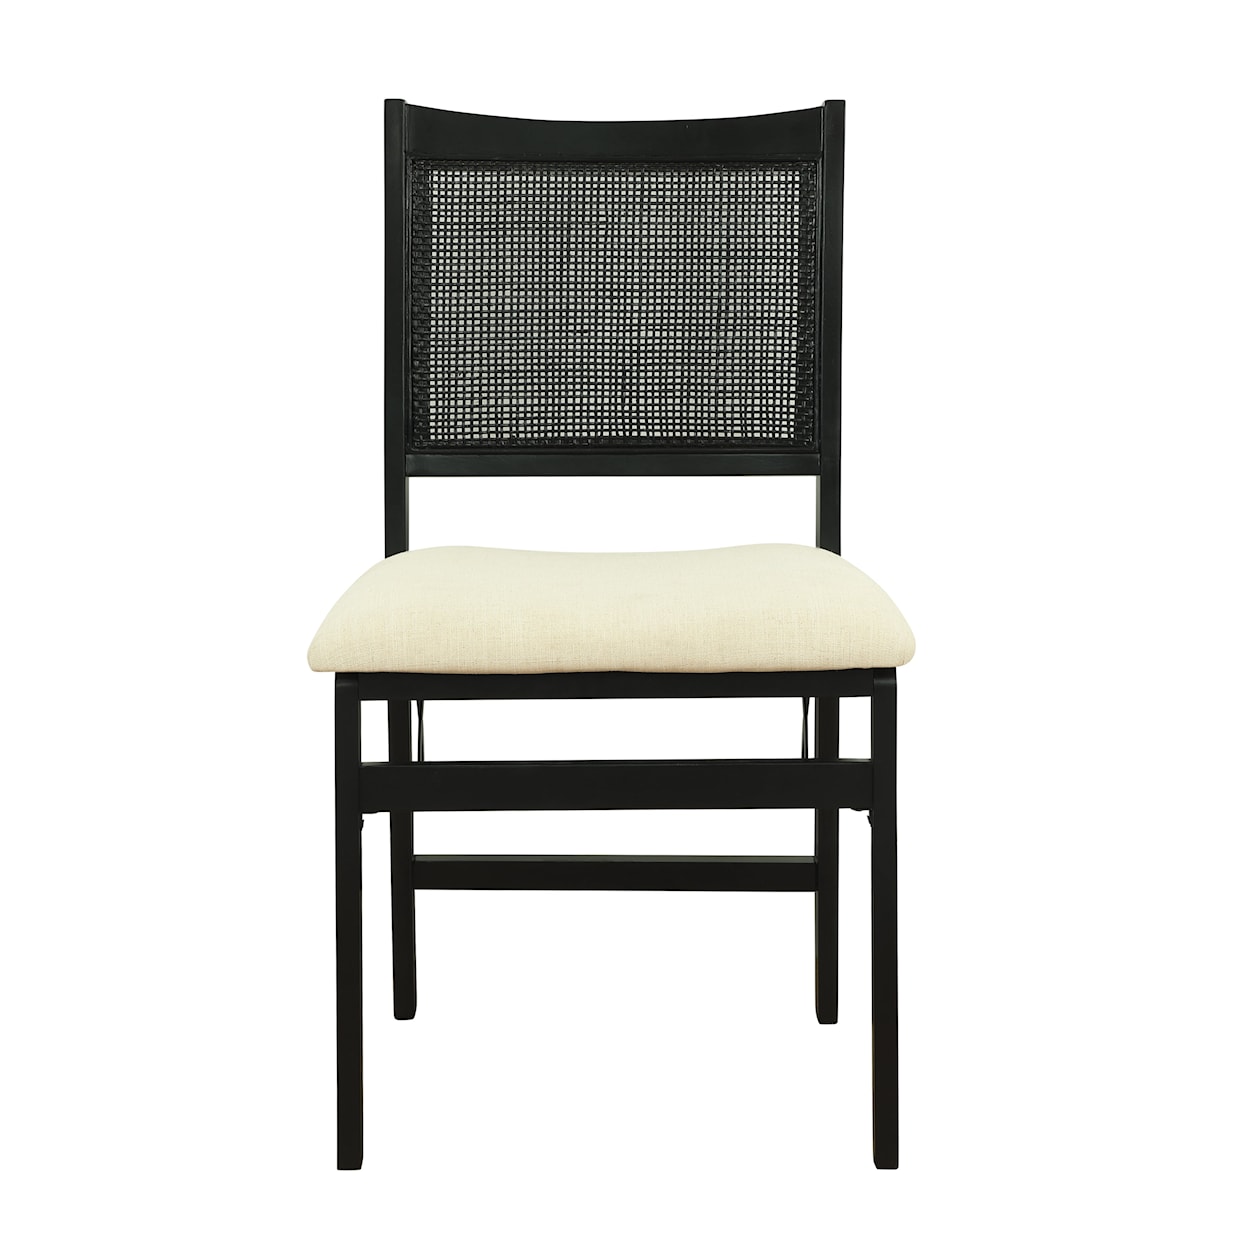 Powell Bauer Upholstered Cane Folding Chair